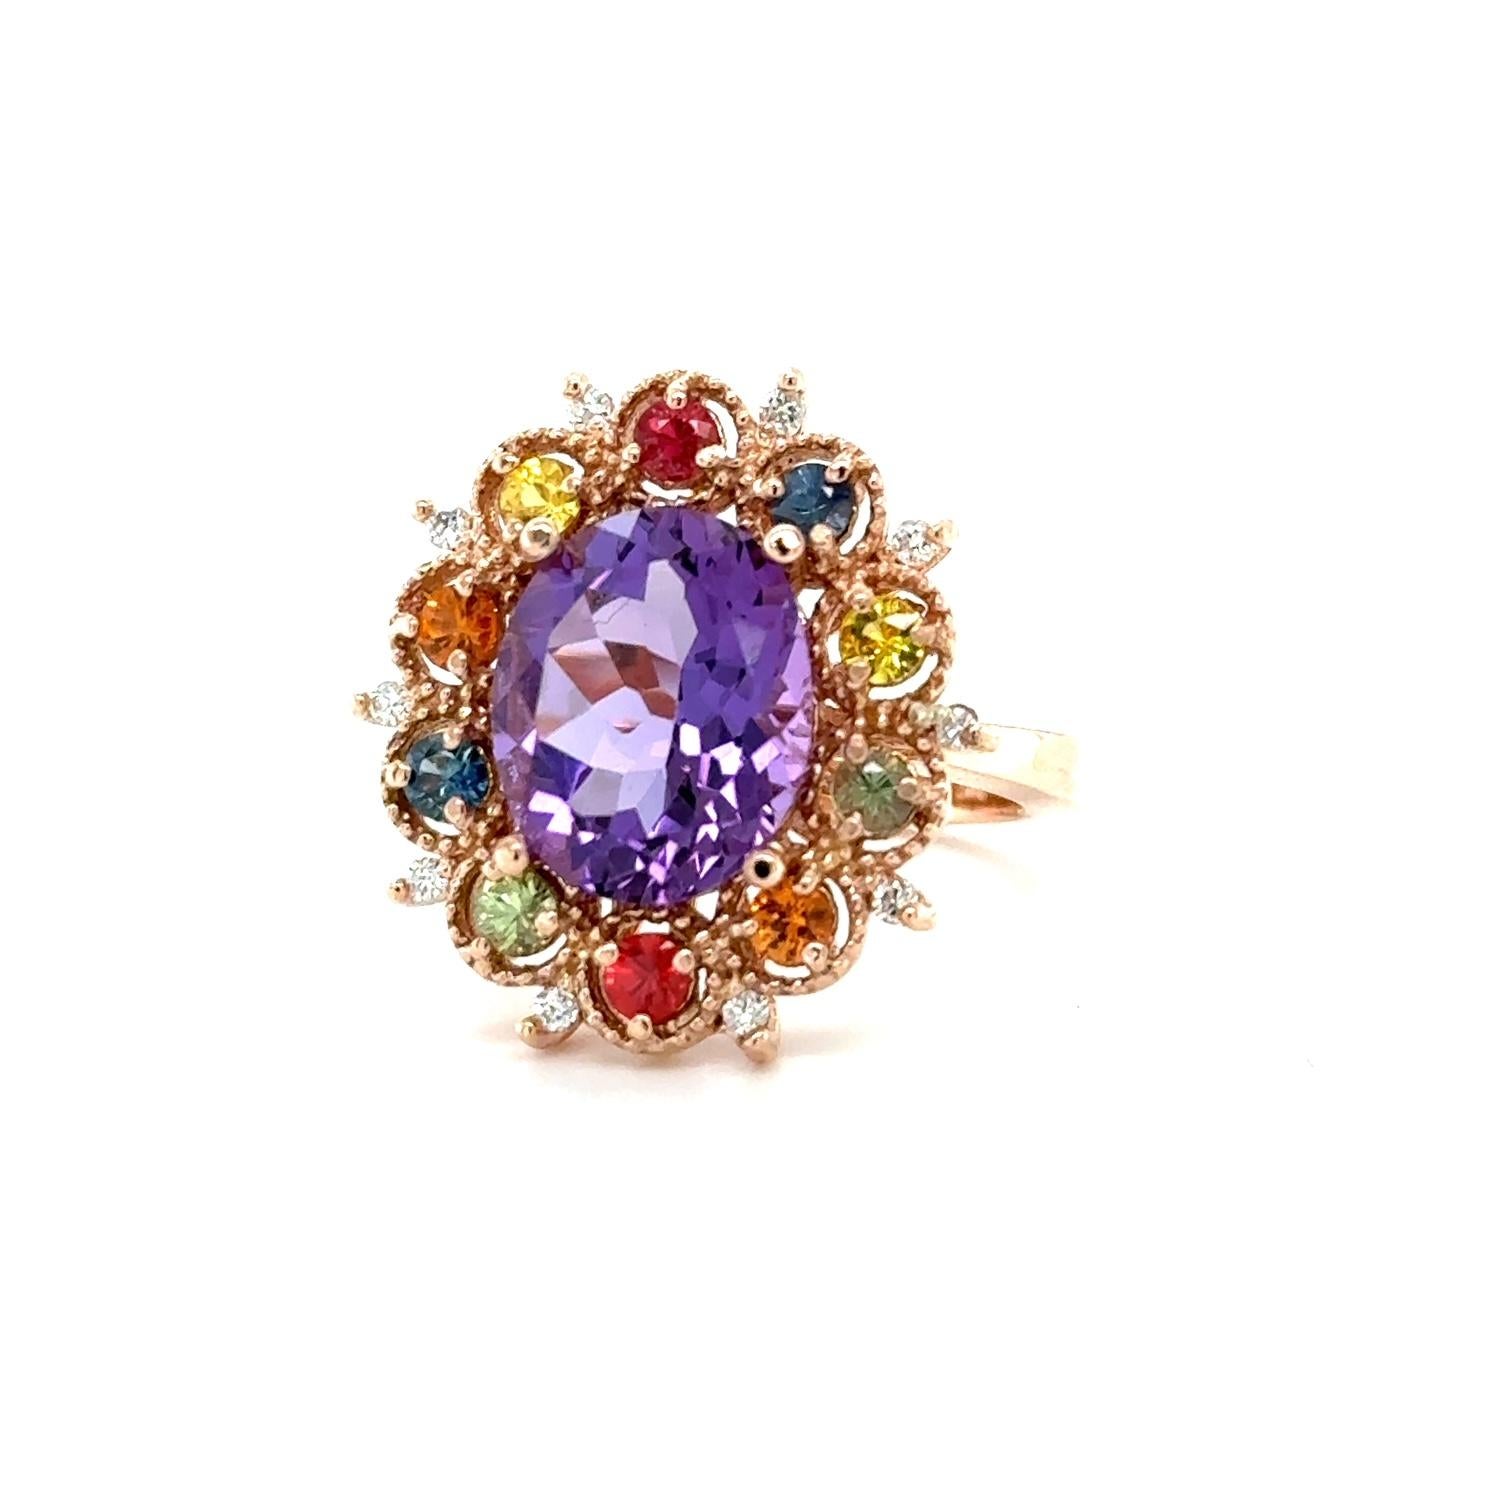 4.98 Carat Oval Cut Amethyst Diamond Sapphire Rose Gold Cocktail Ring In New Condition For Sale In Los Angeles, CA